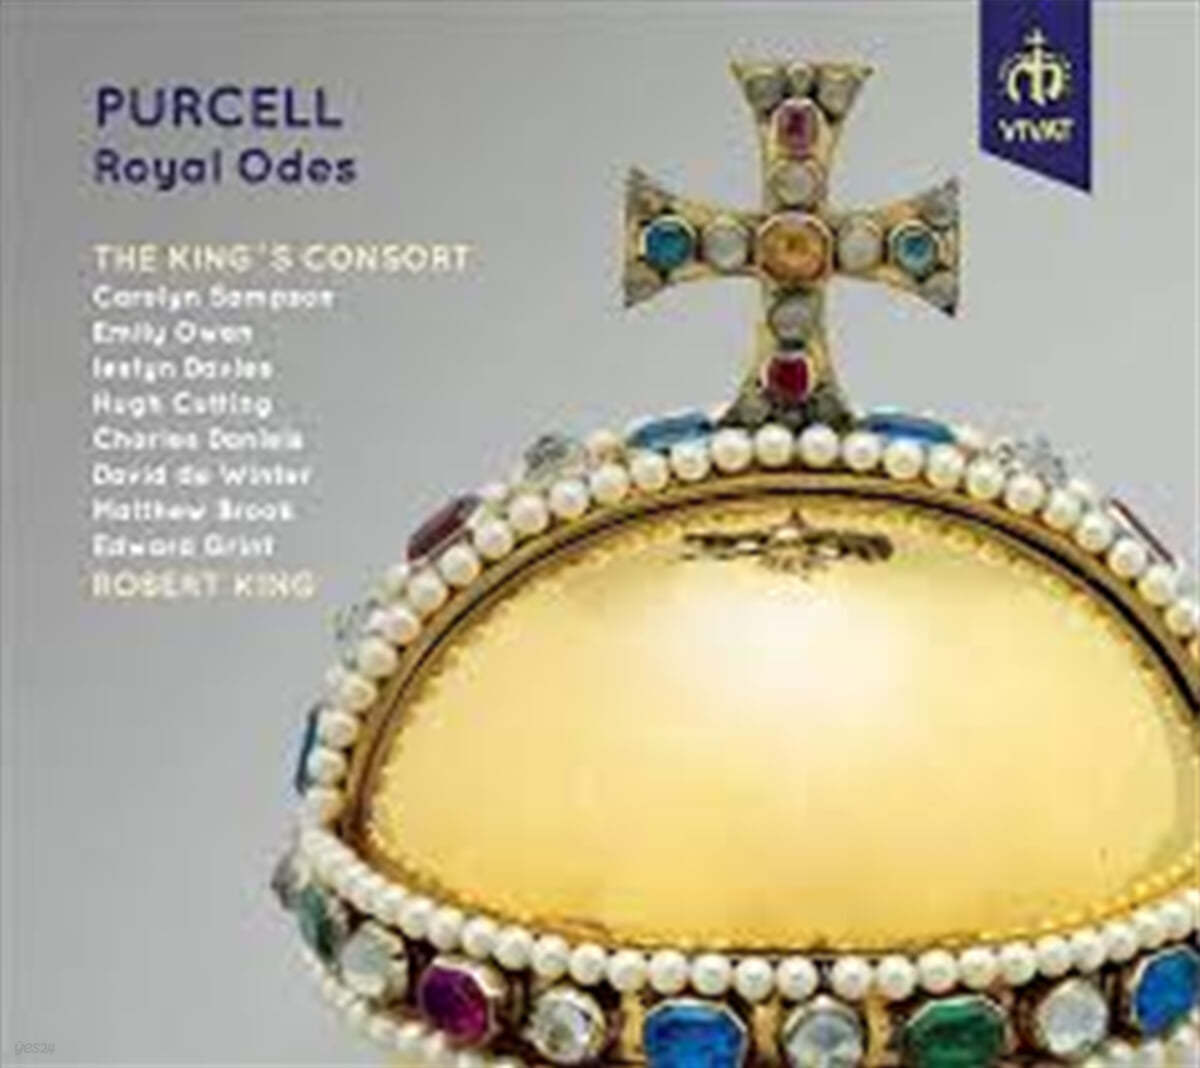 The King’s Consort - Purcell: Royal Odes